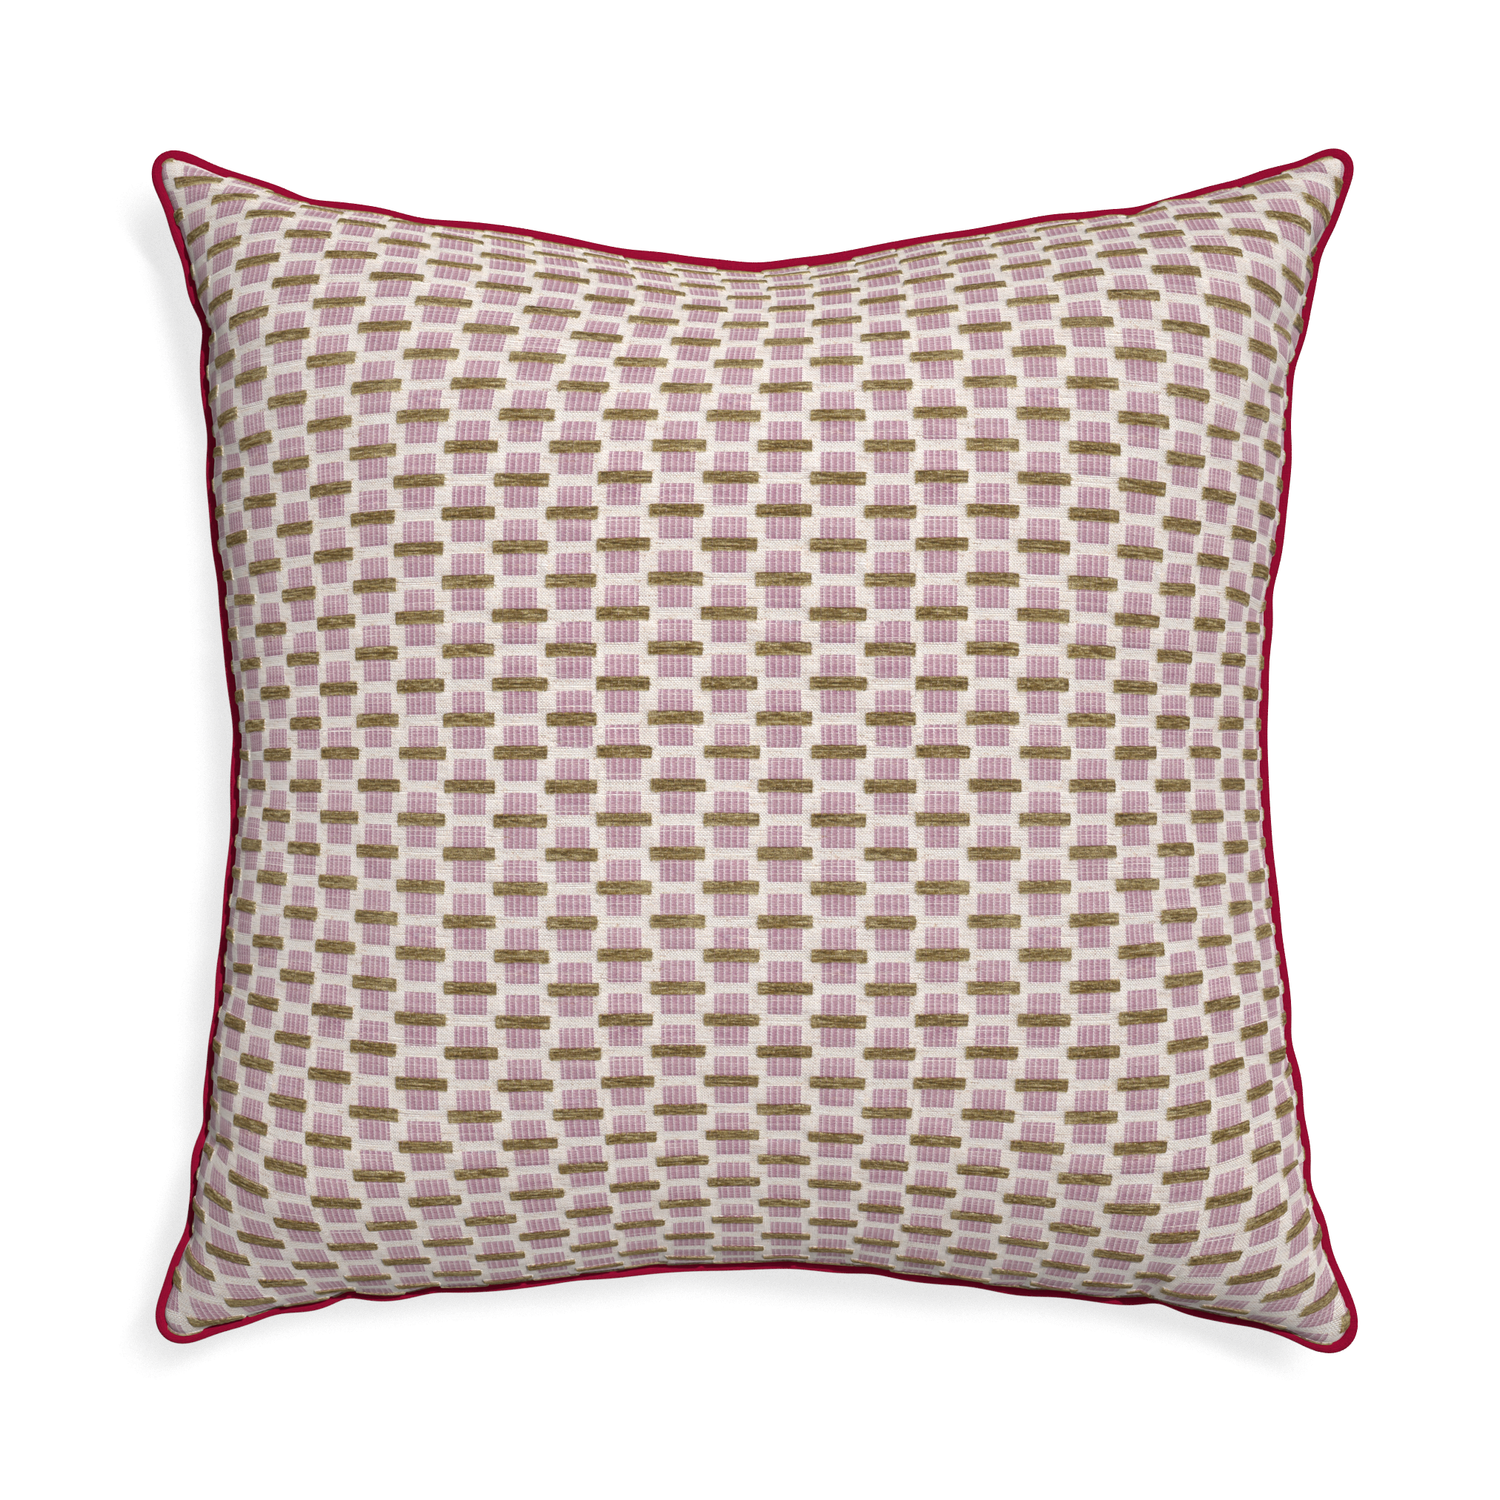 Euro-sham willow orchid custom pink geometric chenillepillow with raspberry piping on white background